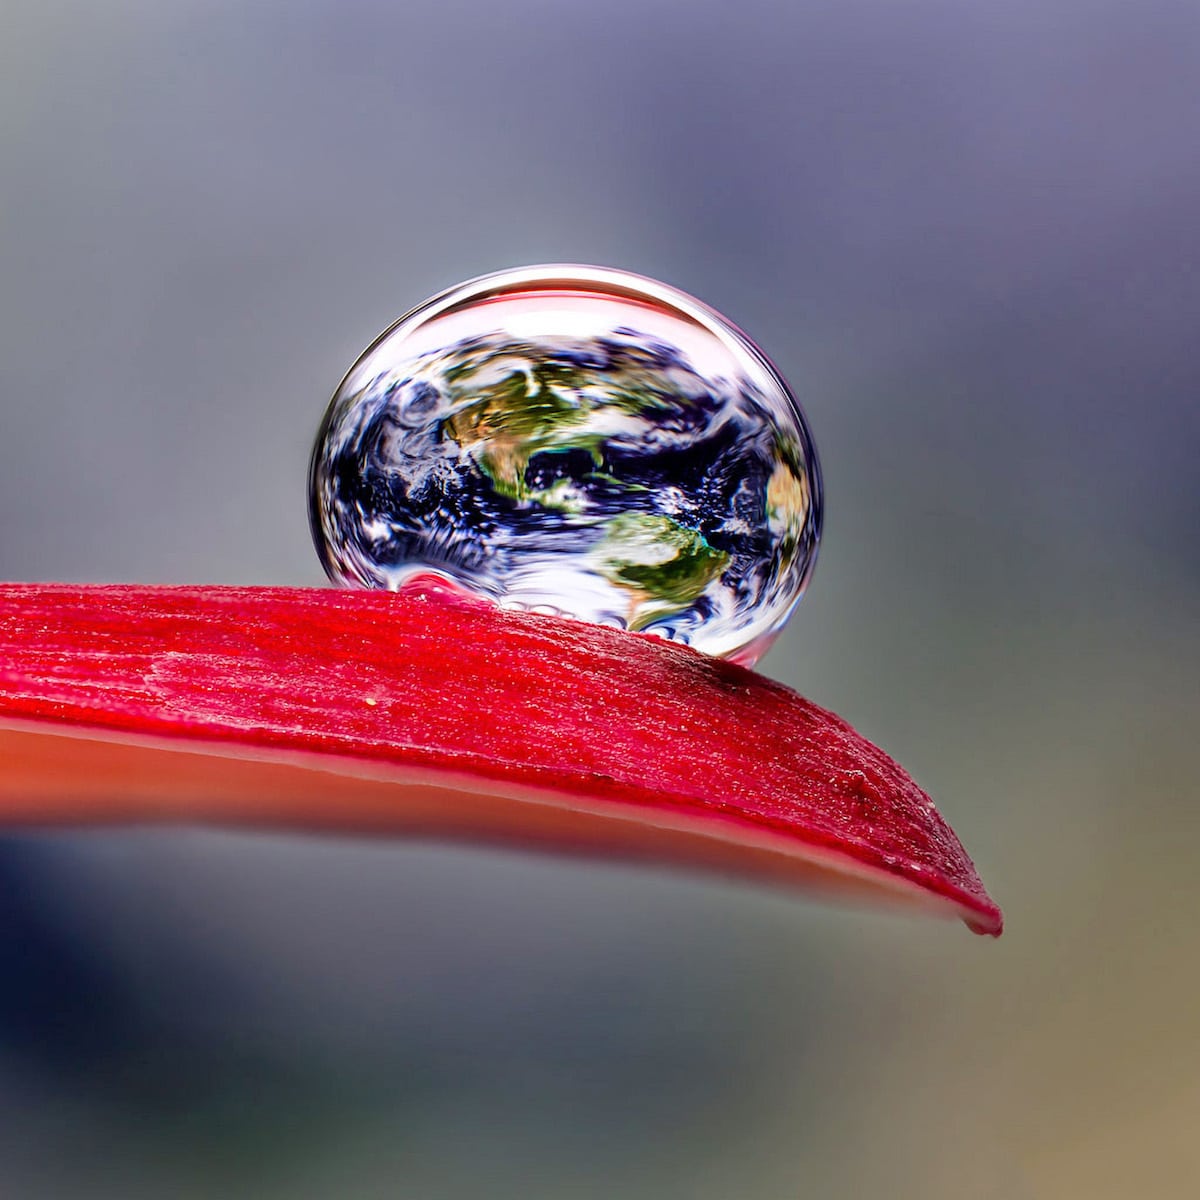 Macro Photography Reveals Water Droplets As Miniature Works Of Art